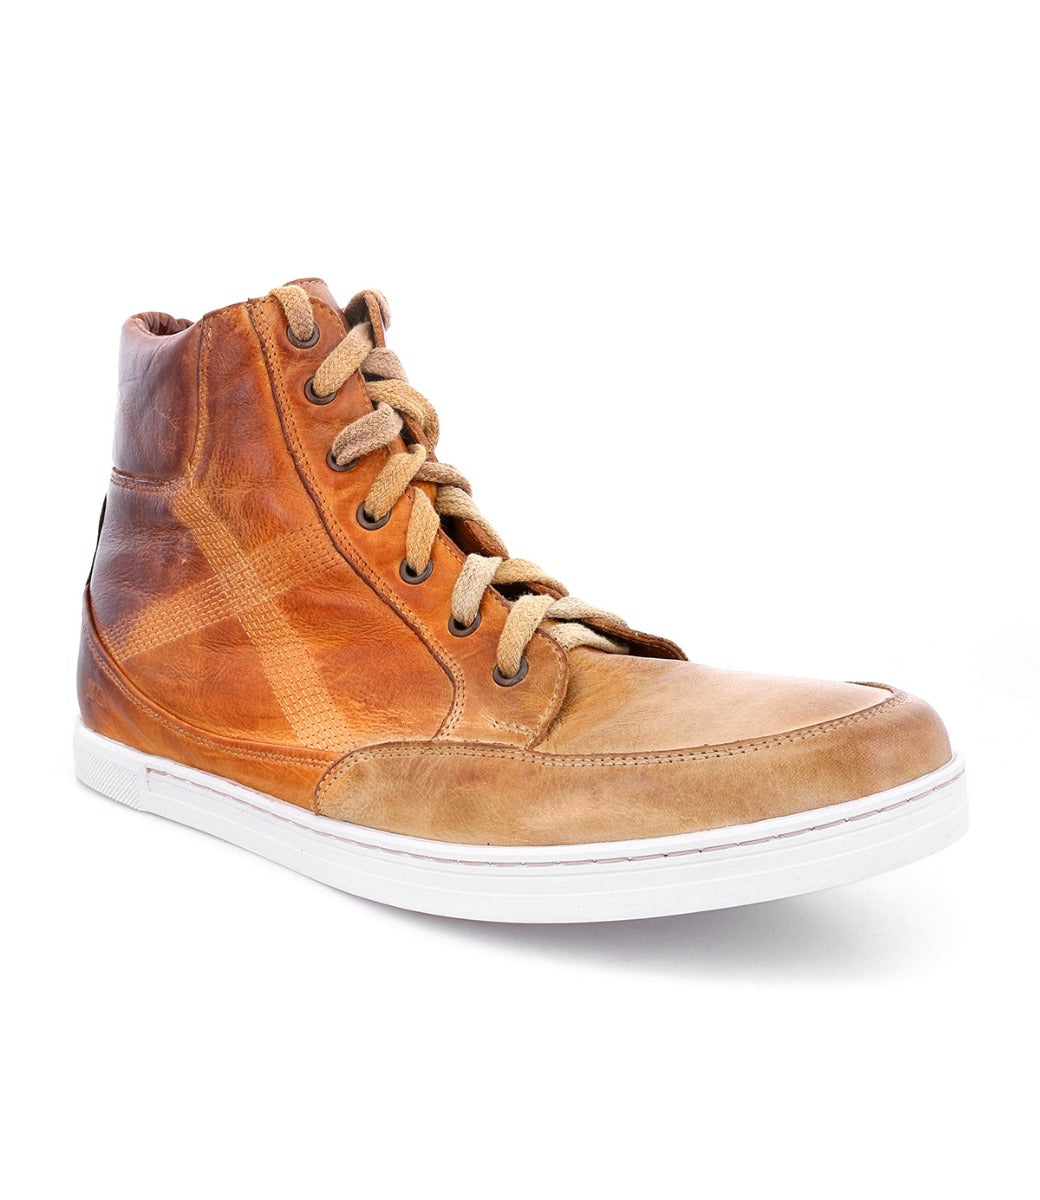 A men's Lordmind by Bed Stu tan leather high top sneaker.